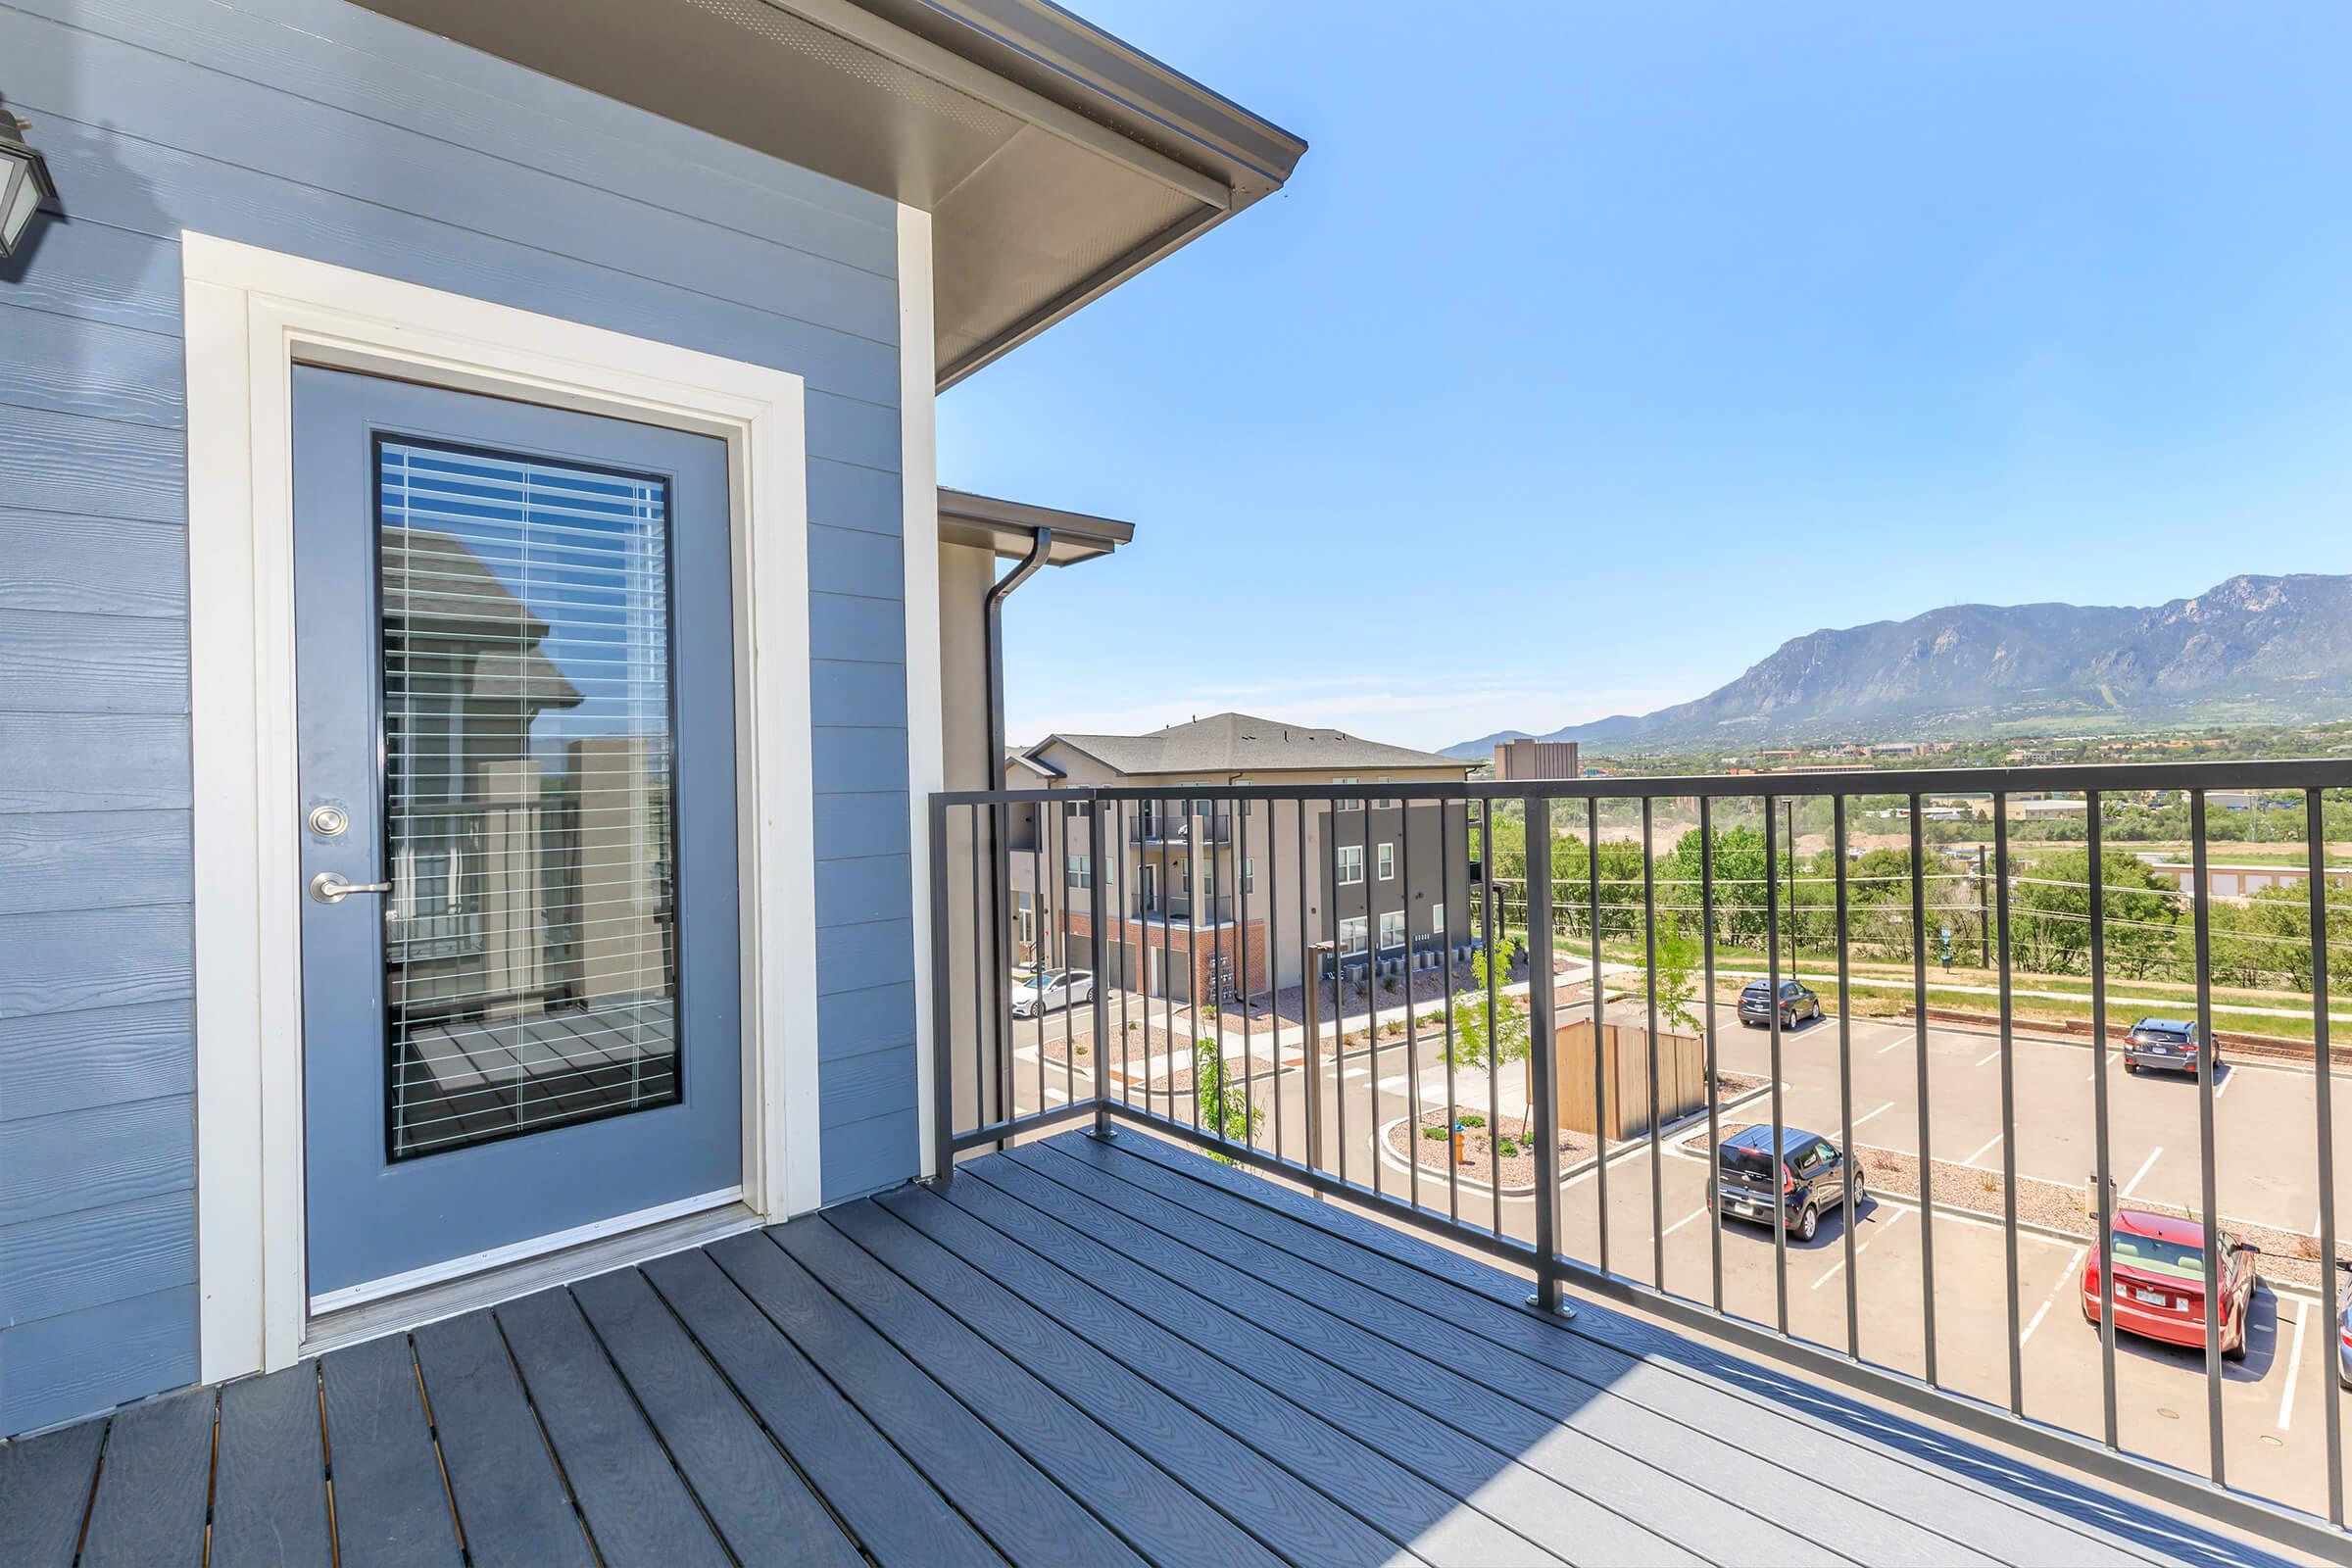 ENJOY THE VIEW FROM YOUR PERSONAL BALCONY OR PATIO